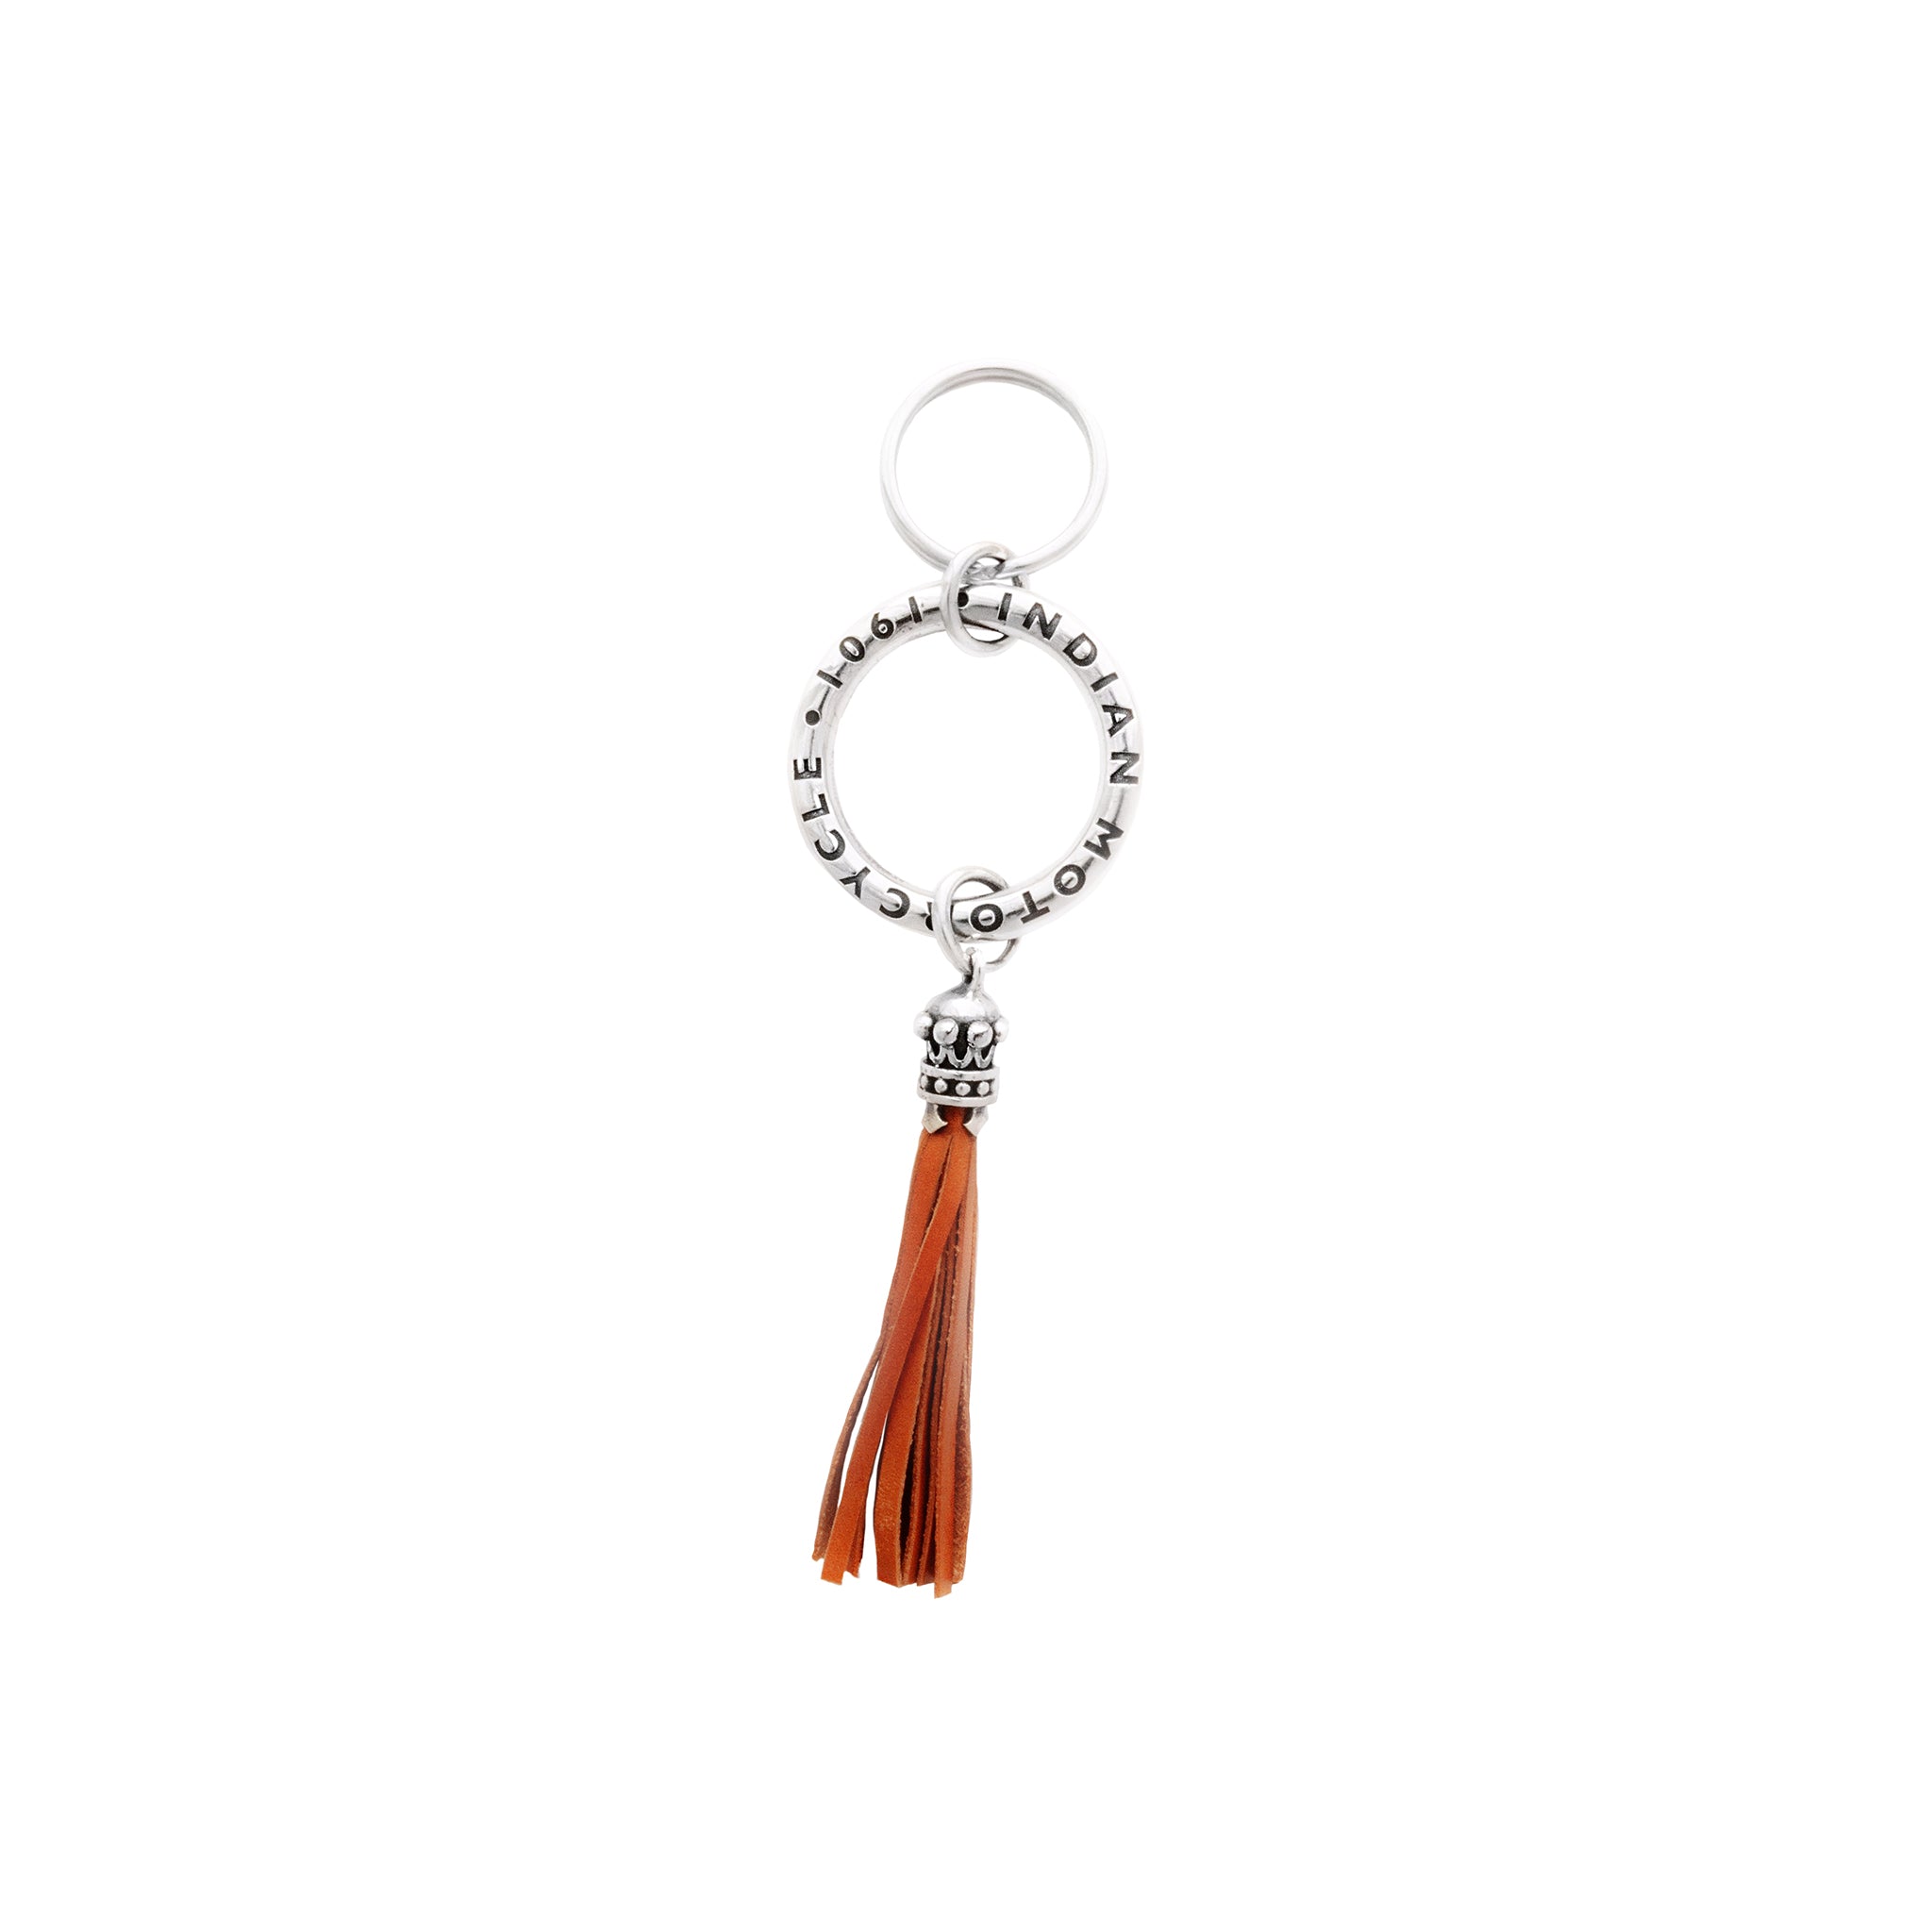 Indian Logo Ring Key Fob with Brown Leather Tassel